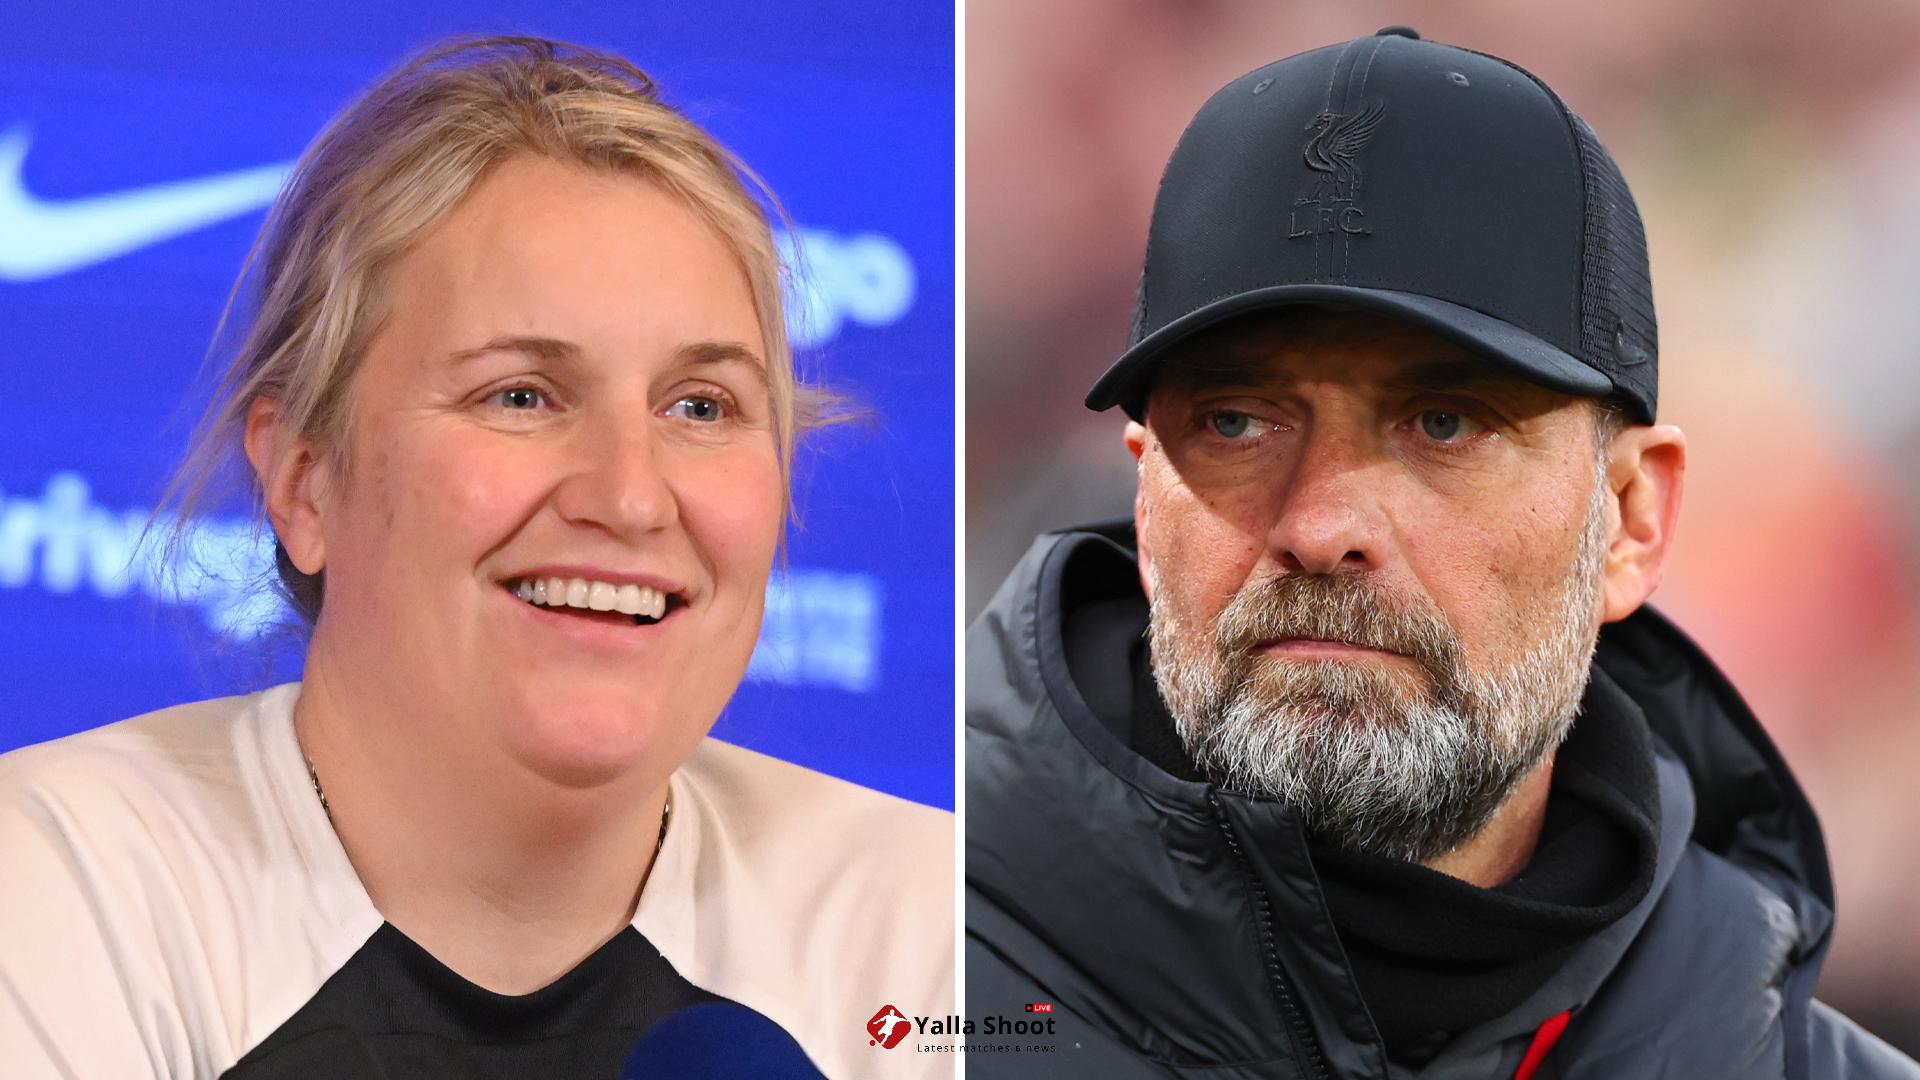 Emma Hayes 'shocked' by Brighton sacking and opens up on Klopp leaving Reds